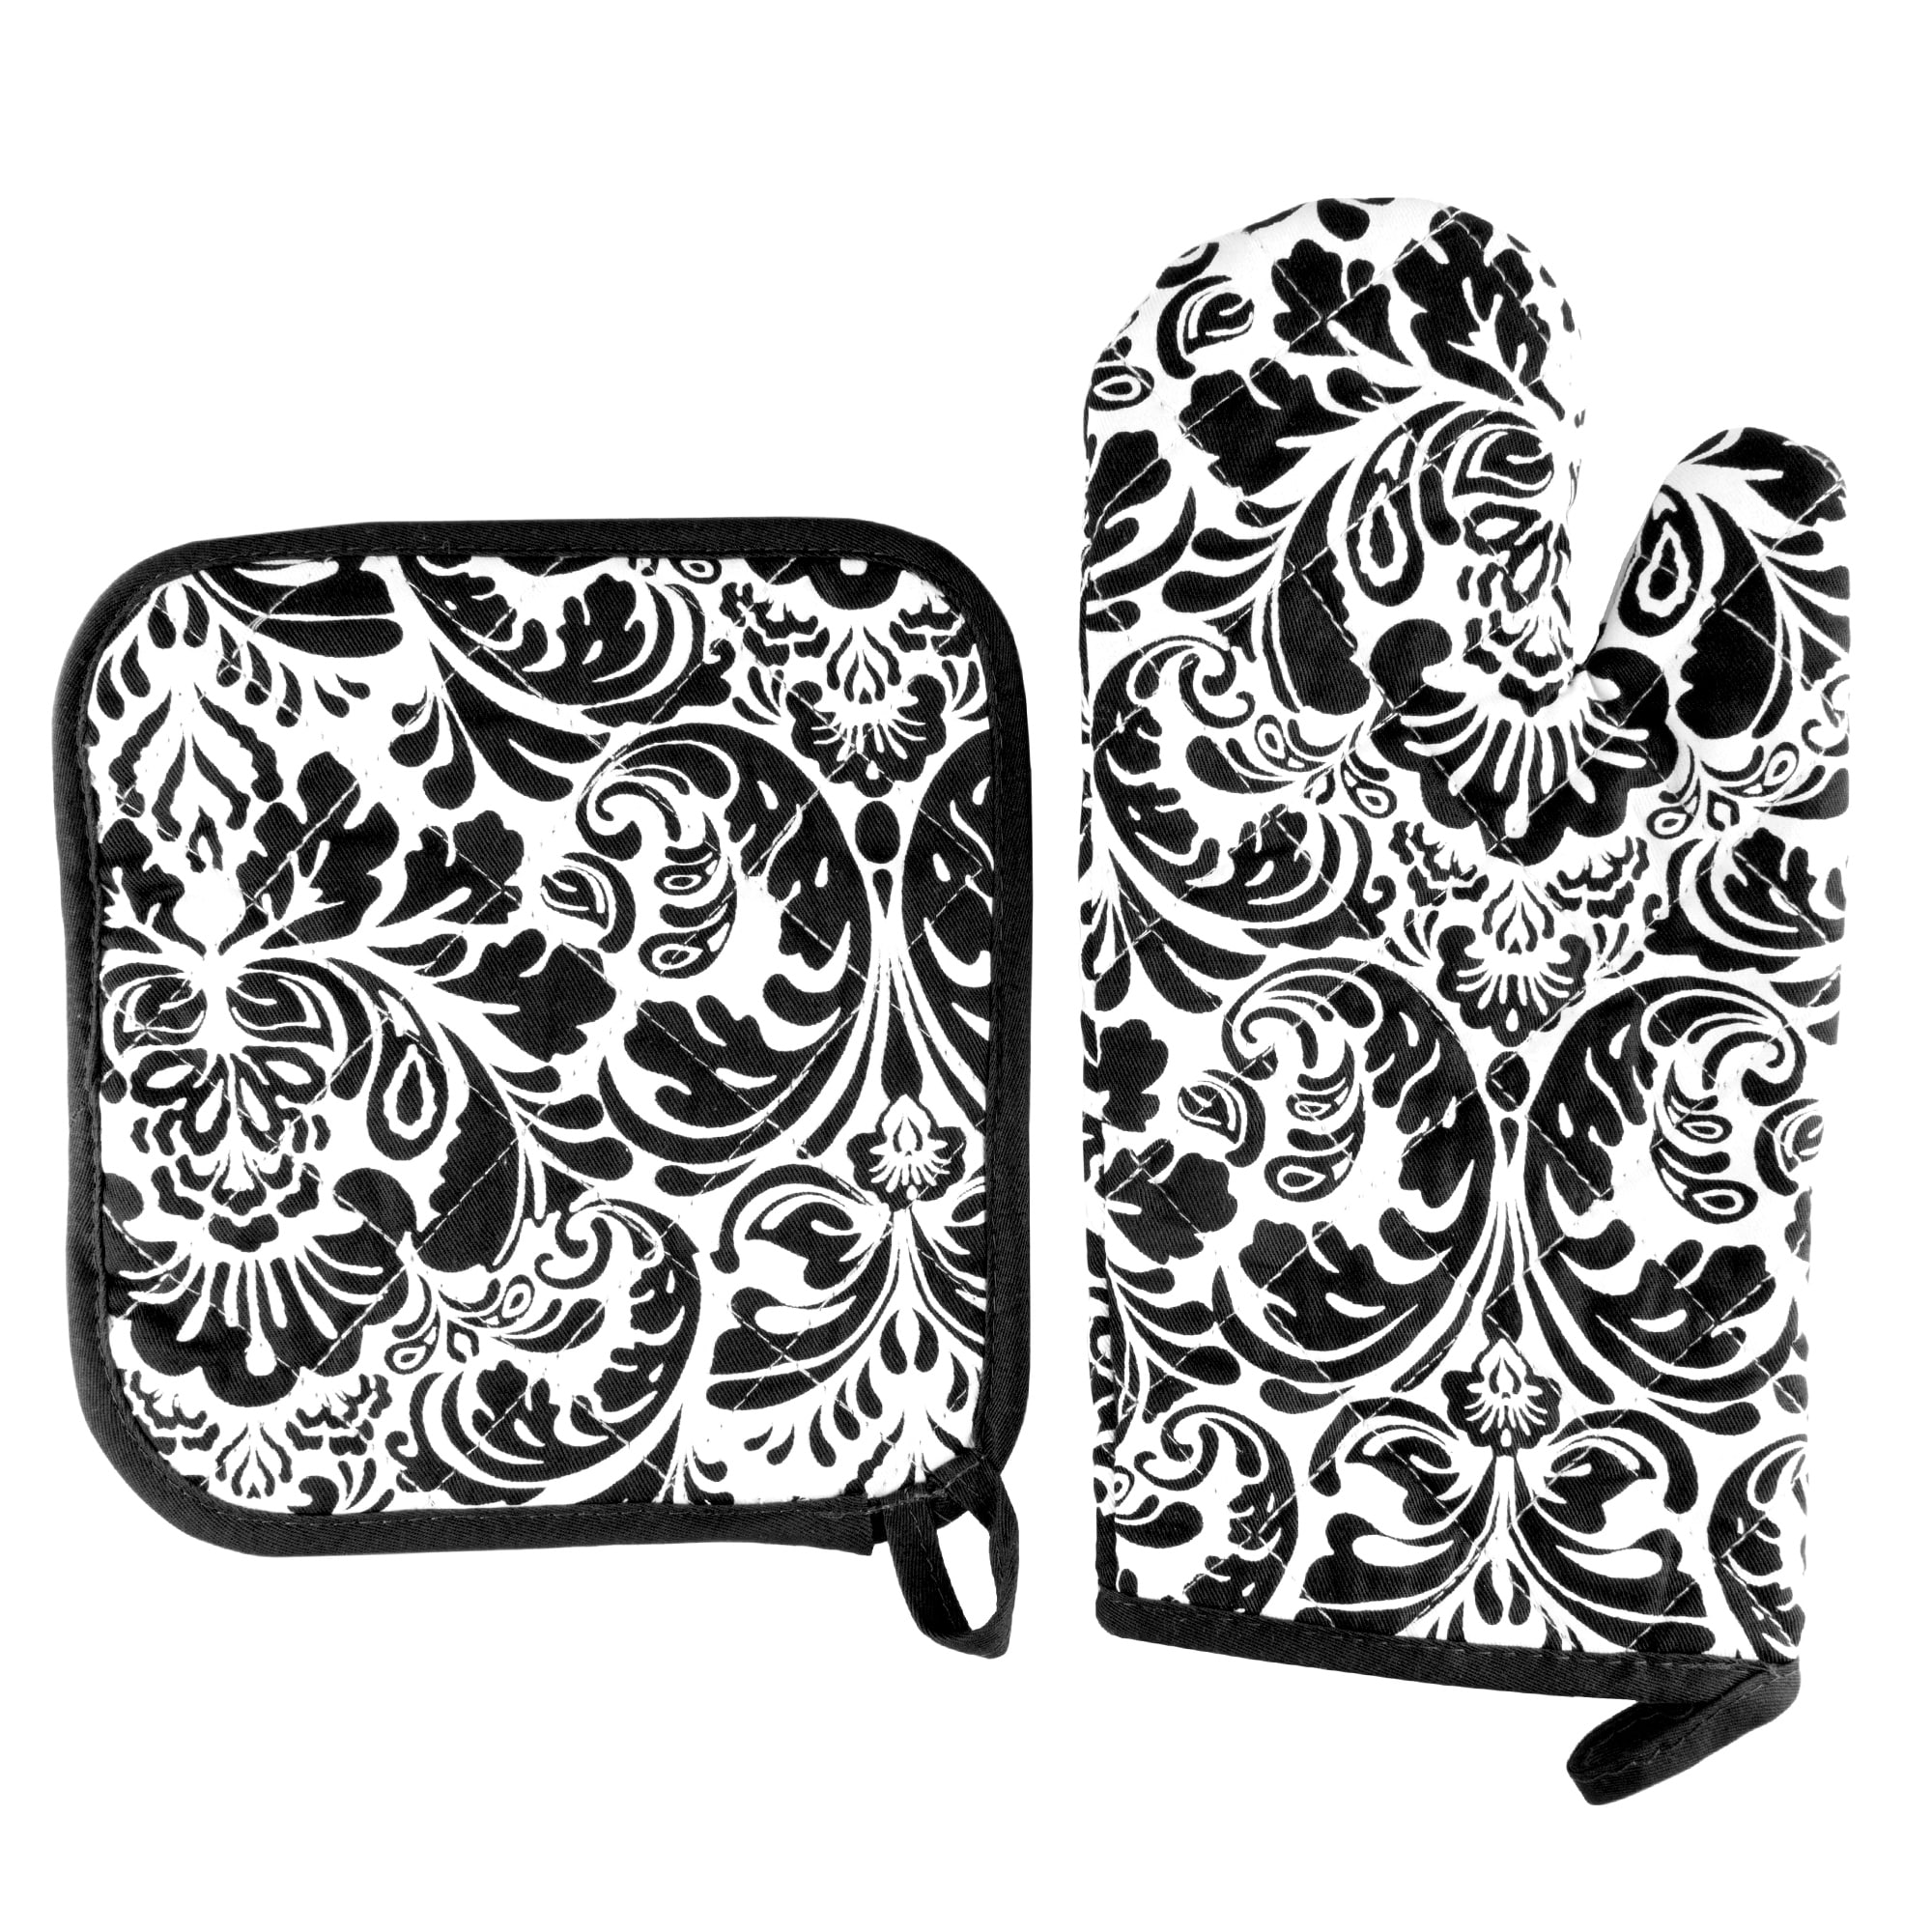 https://ak1.ostkcdn.com/images/products/is/images/direct/1ddff5eebc0c3672bba861b241ef8faa1fd11a28/Oven-Mitt-And-Pot-Holder-Set%2C-Quilted-And-Flame-And-Heat-Resistant-By-Windsor-Home.jpg